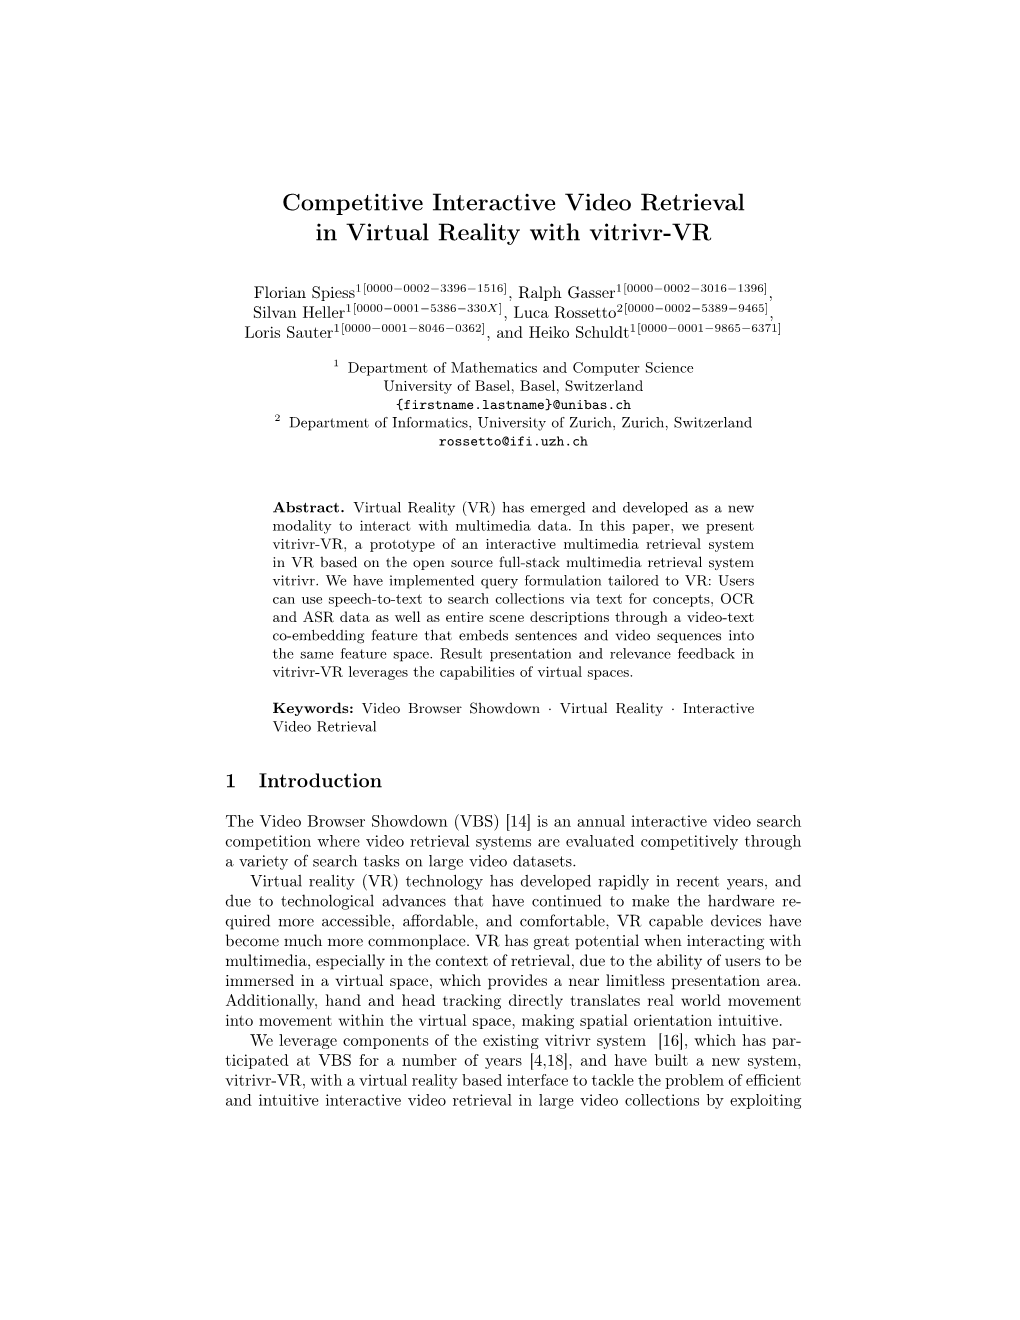 Competitive Interactive Video Retrieval in Virtual Reality with Vitrivr-VR